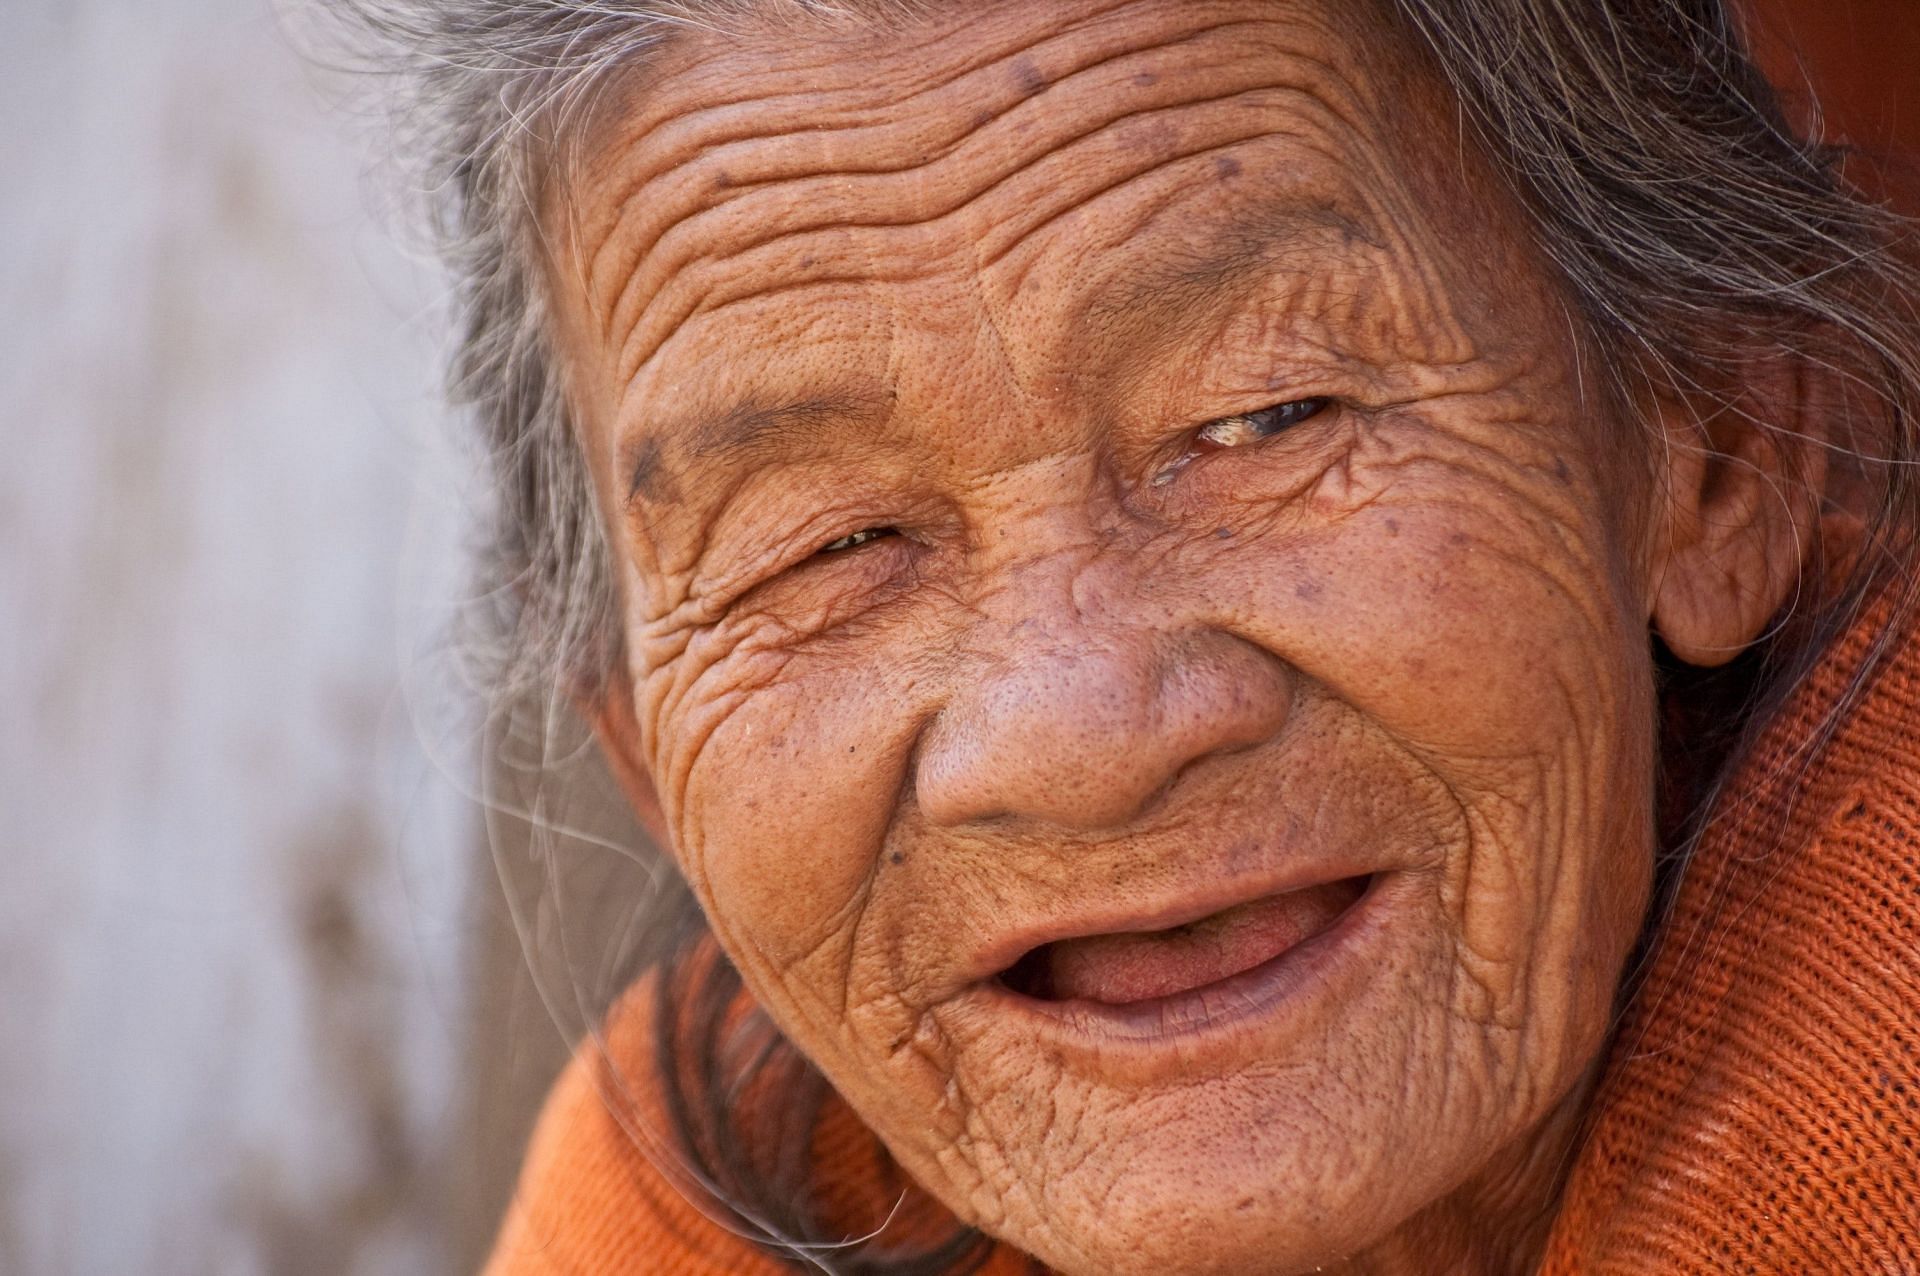 Premature aging due to lack of SPF (image sourced via pexels / photo by Pixabay)